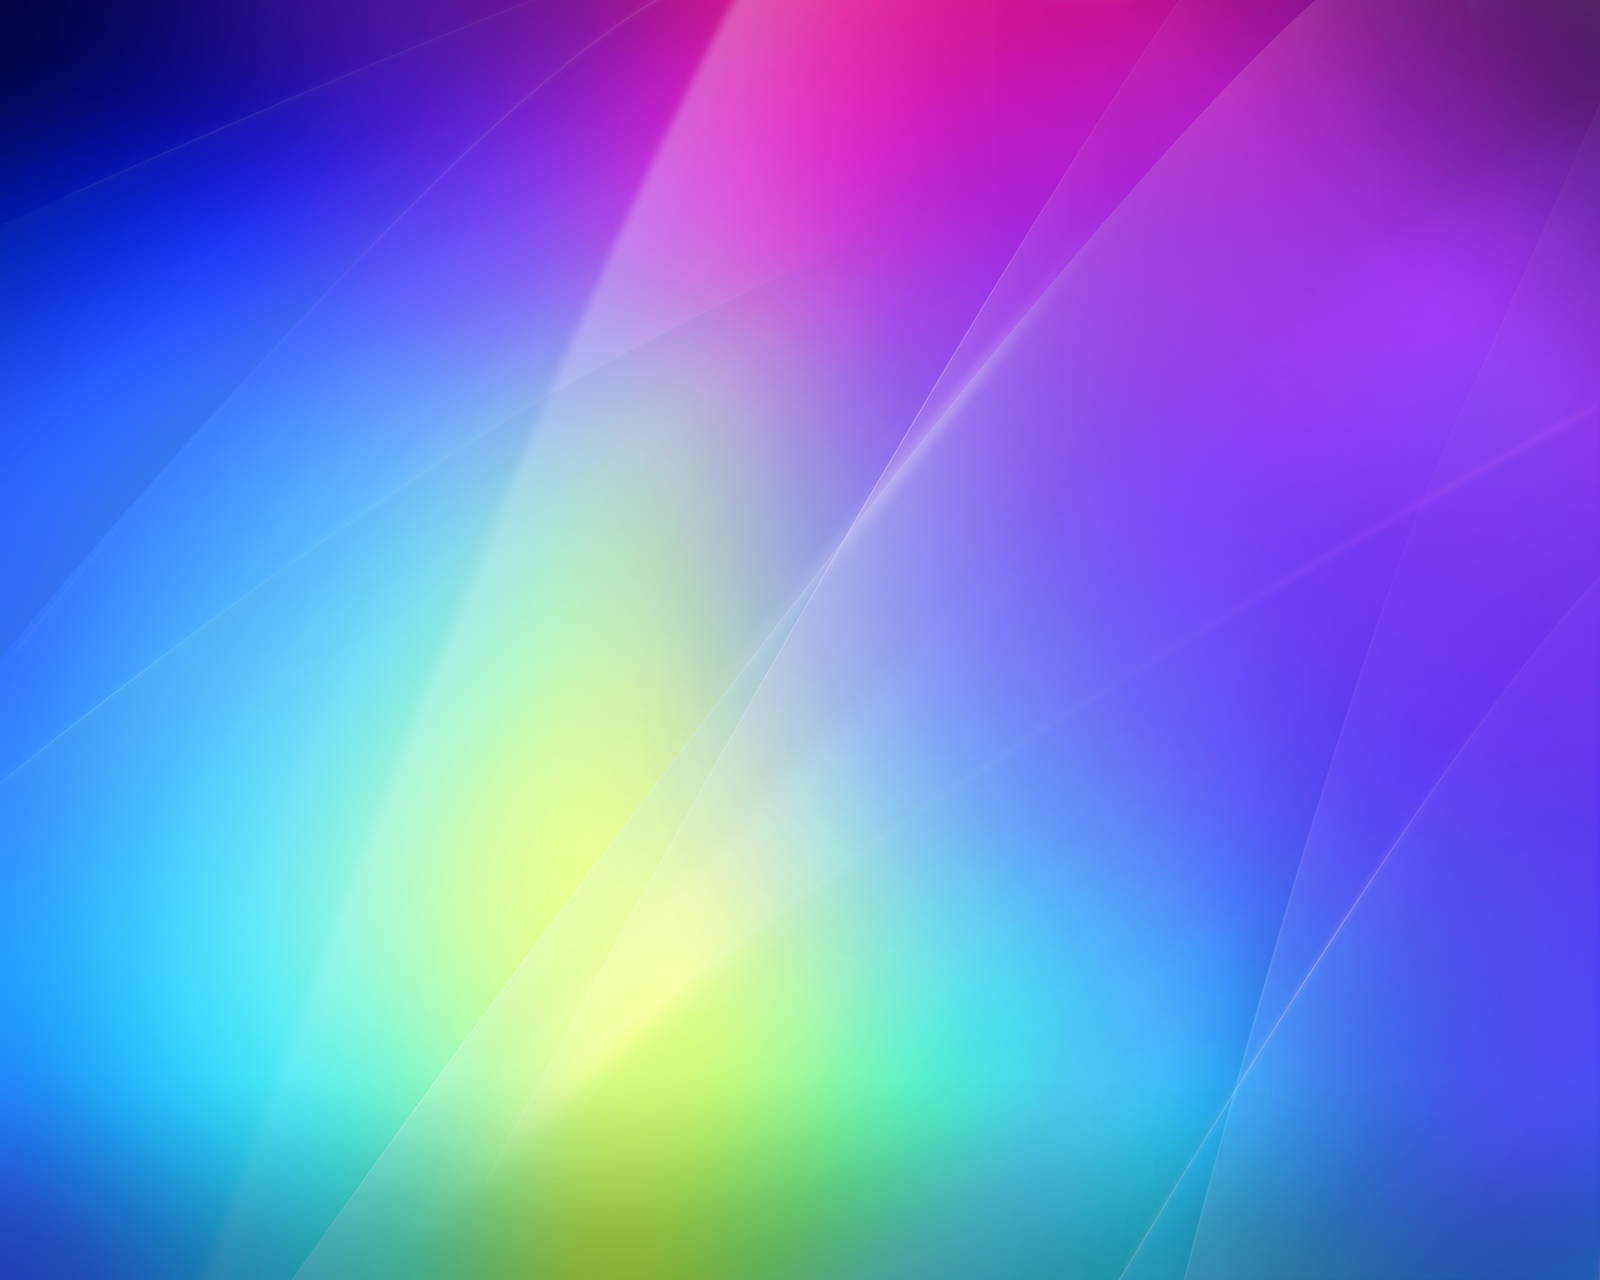 HD Wallpapers - Android, IOS, Windows Phone and Desktop: Samsung Galaxy